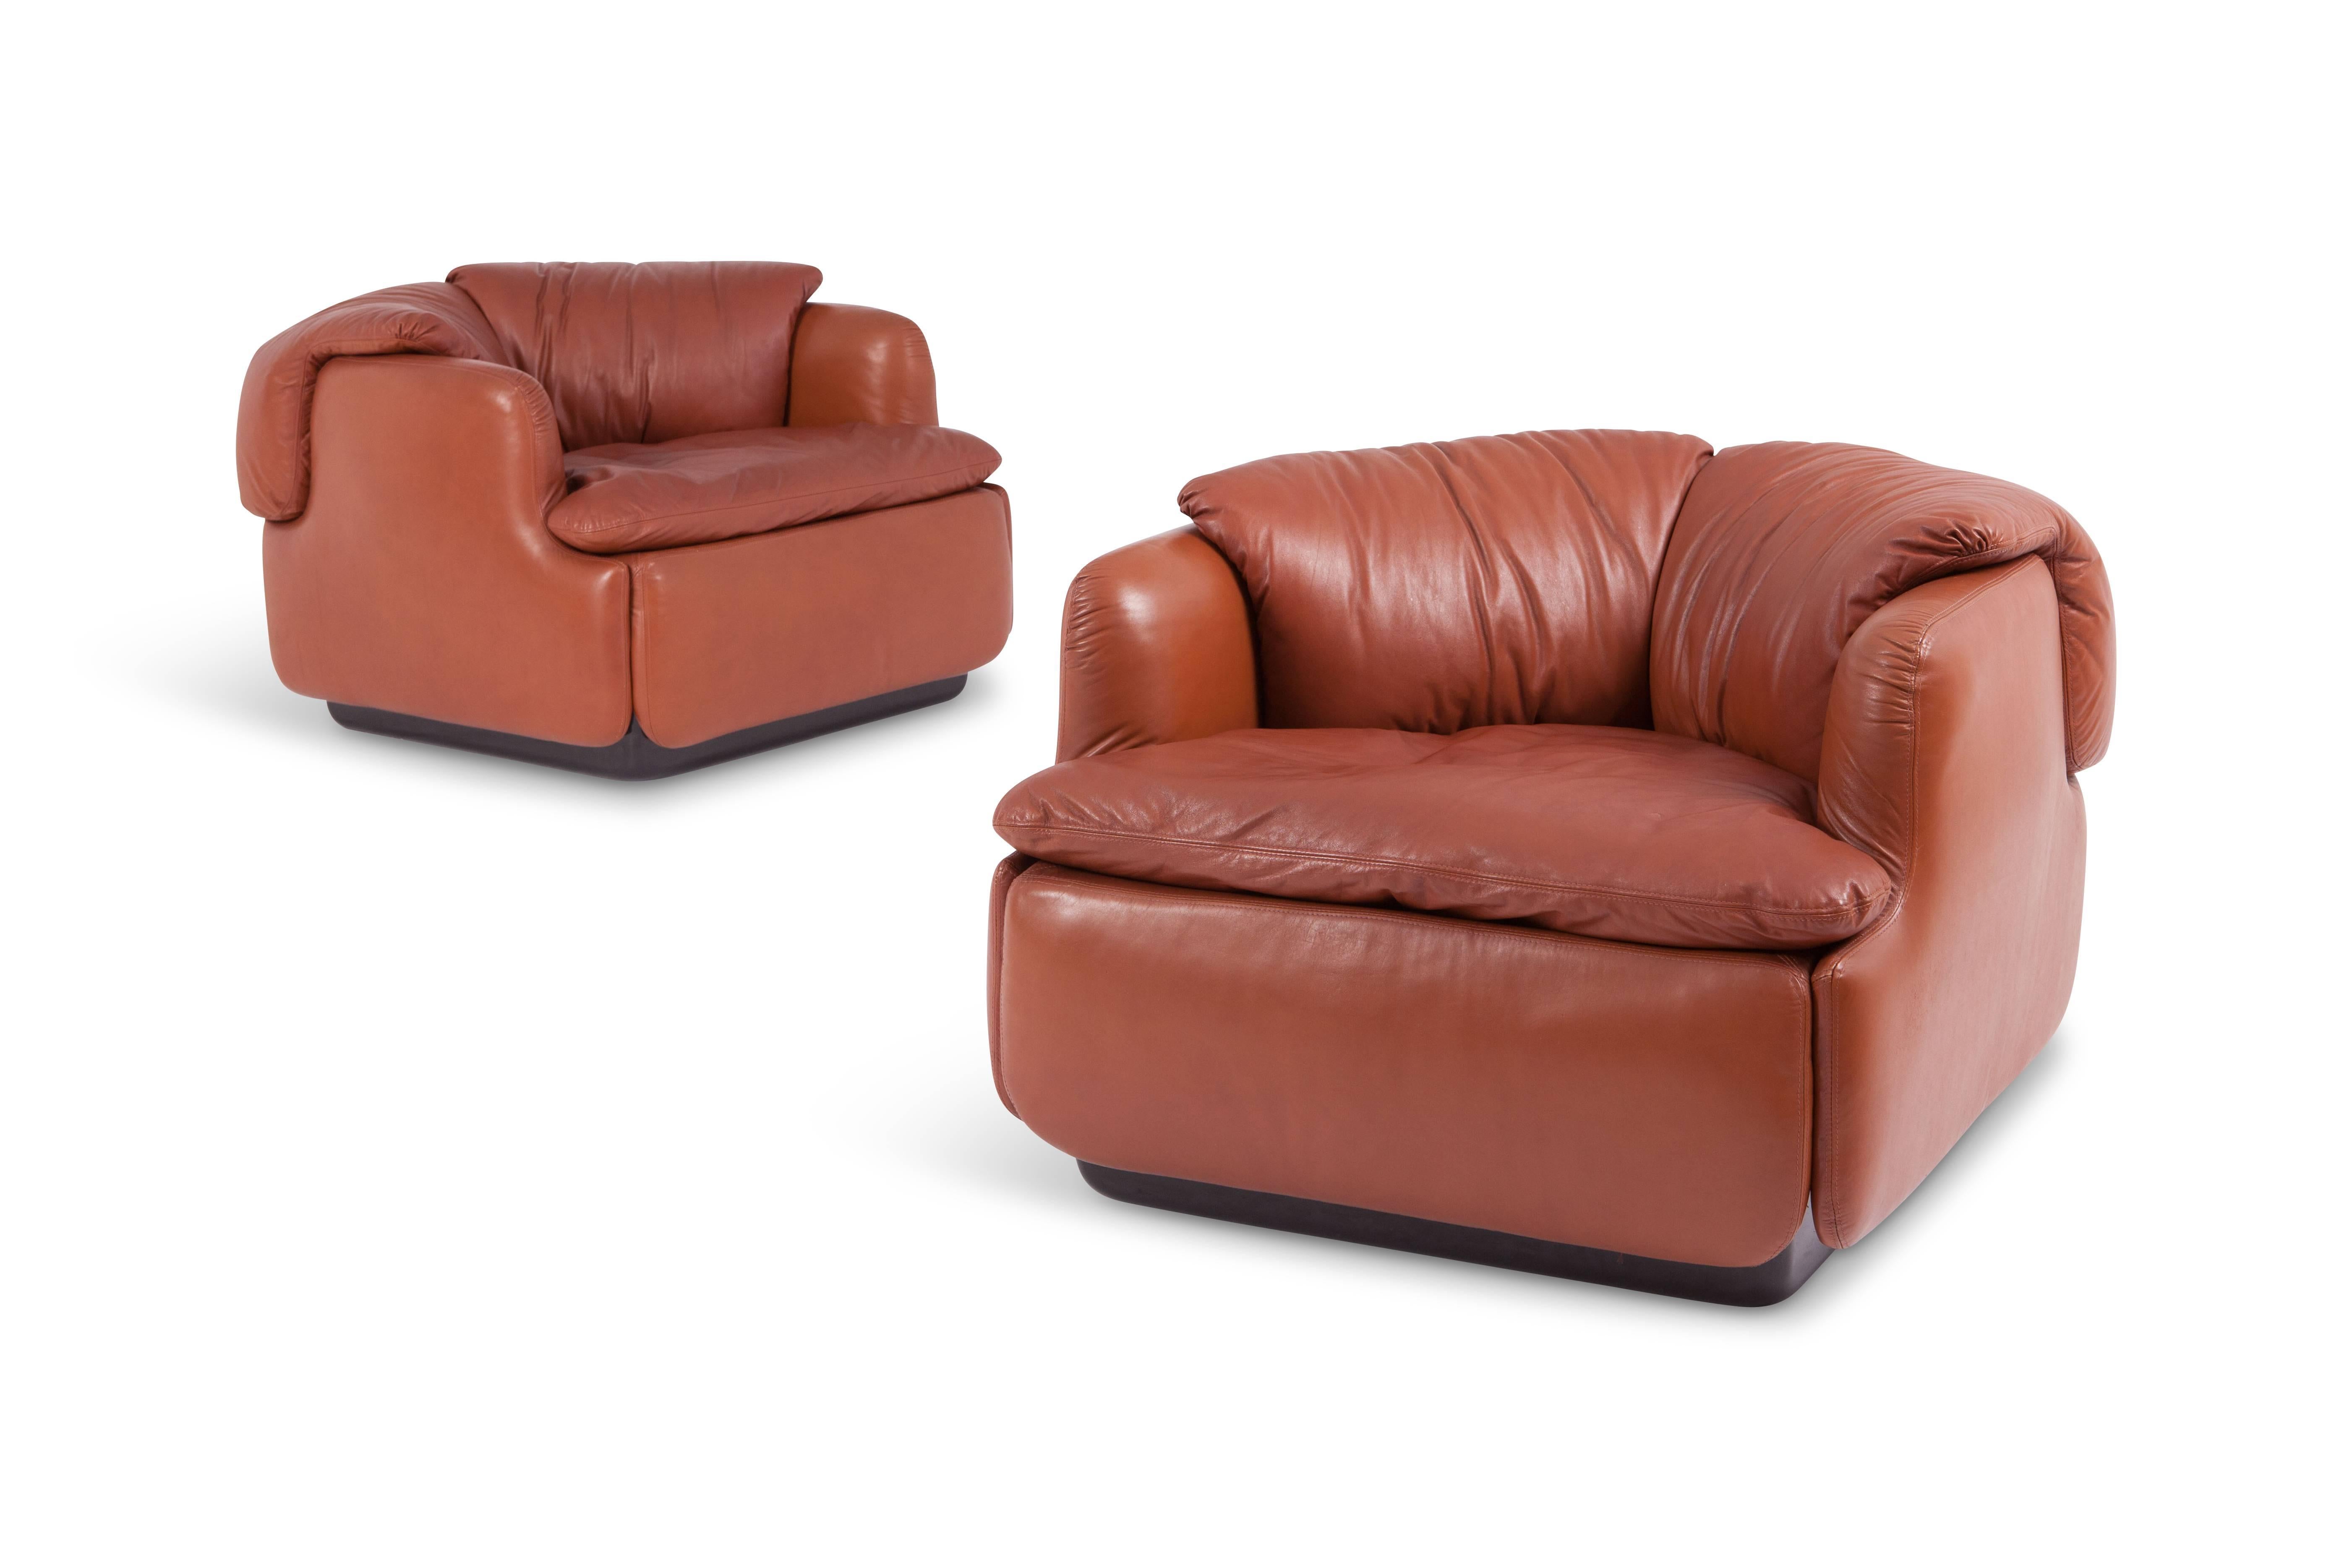 Saporiti “Confidential” Leather Club Chairs by Alberto Rosselli 1